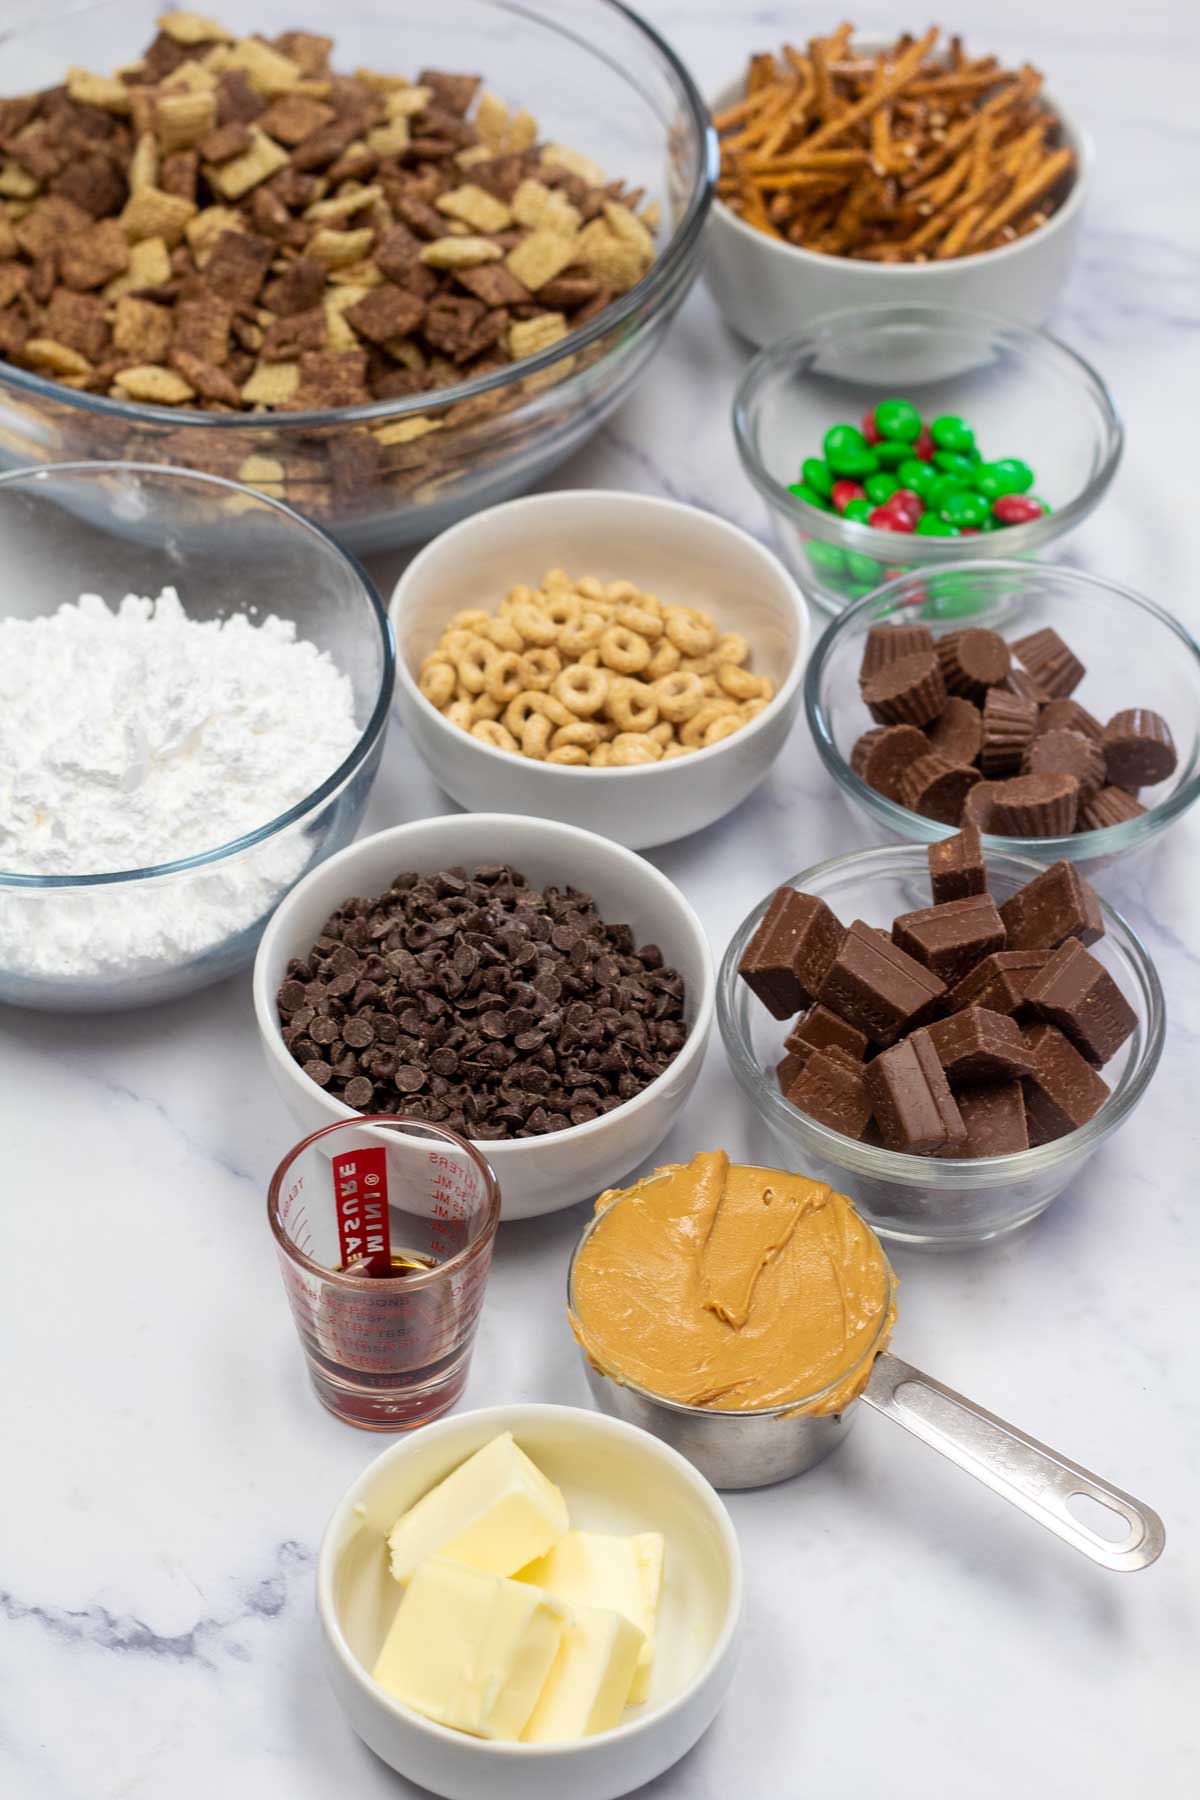 Tall image showing reindeer chow ingredients.